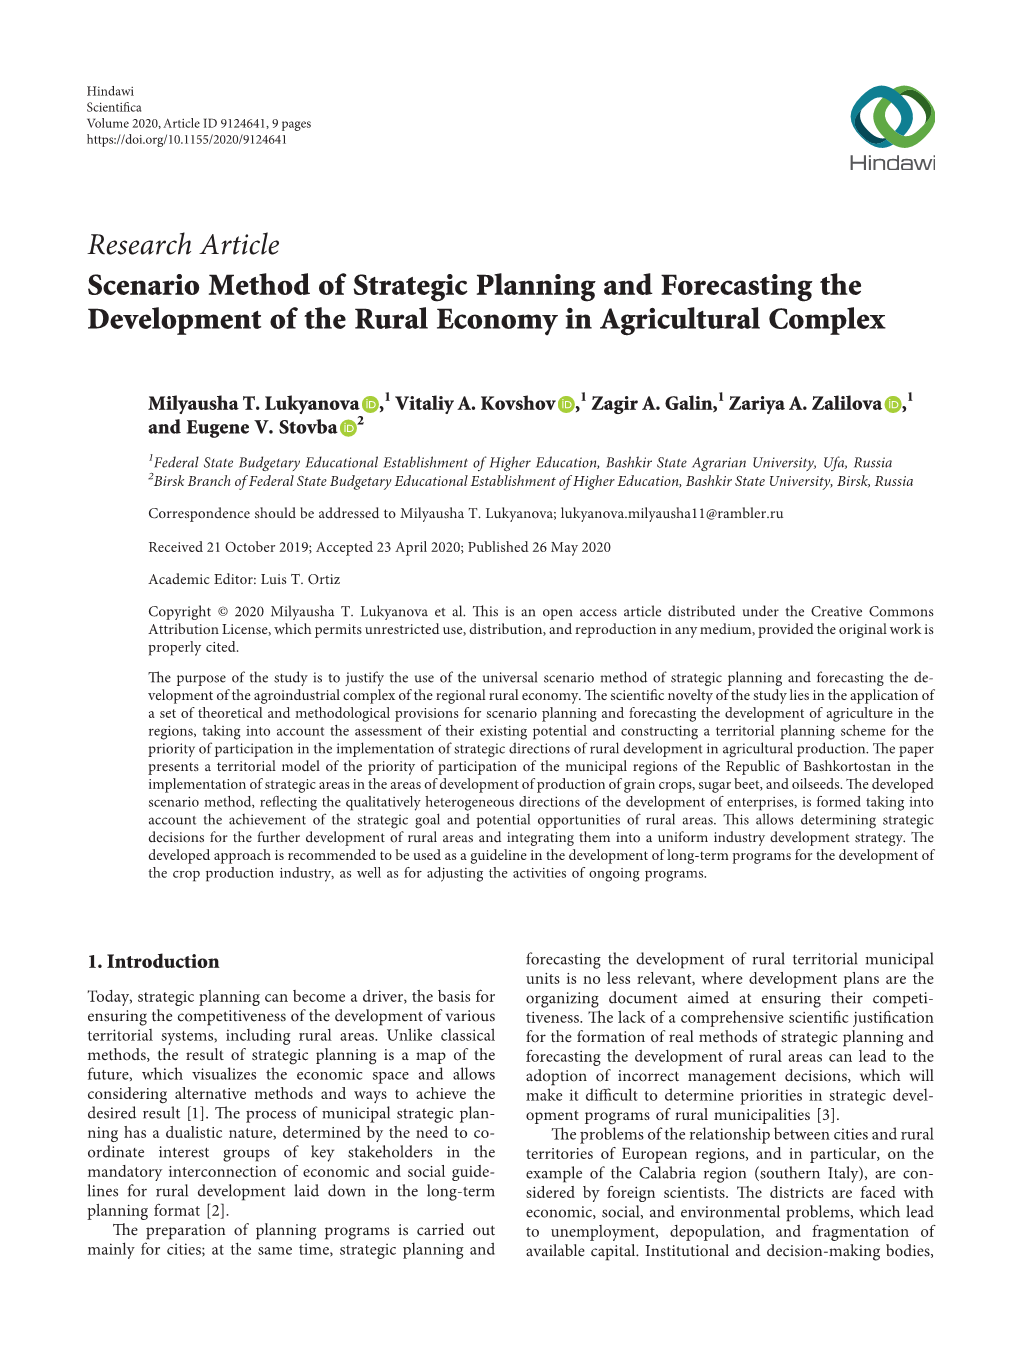 Scenario Method of Strategic Planning and Forecasting the Development of the Rural Economy in Agricultural Complex